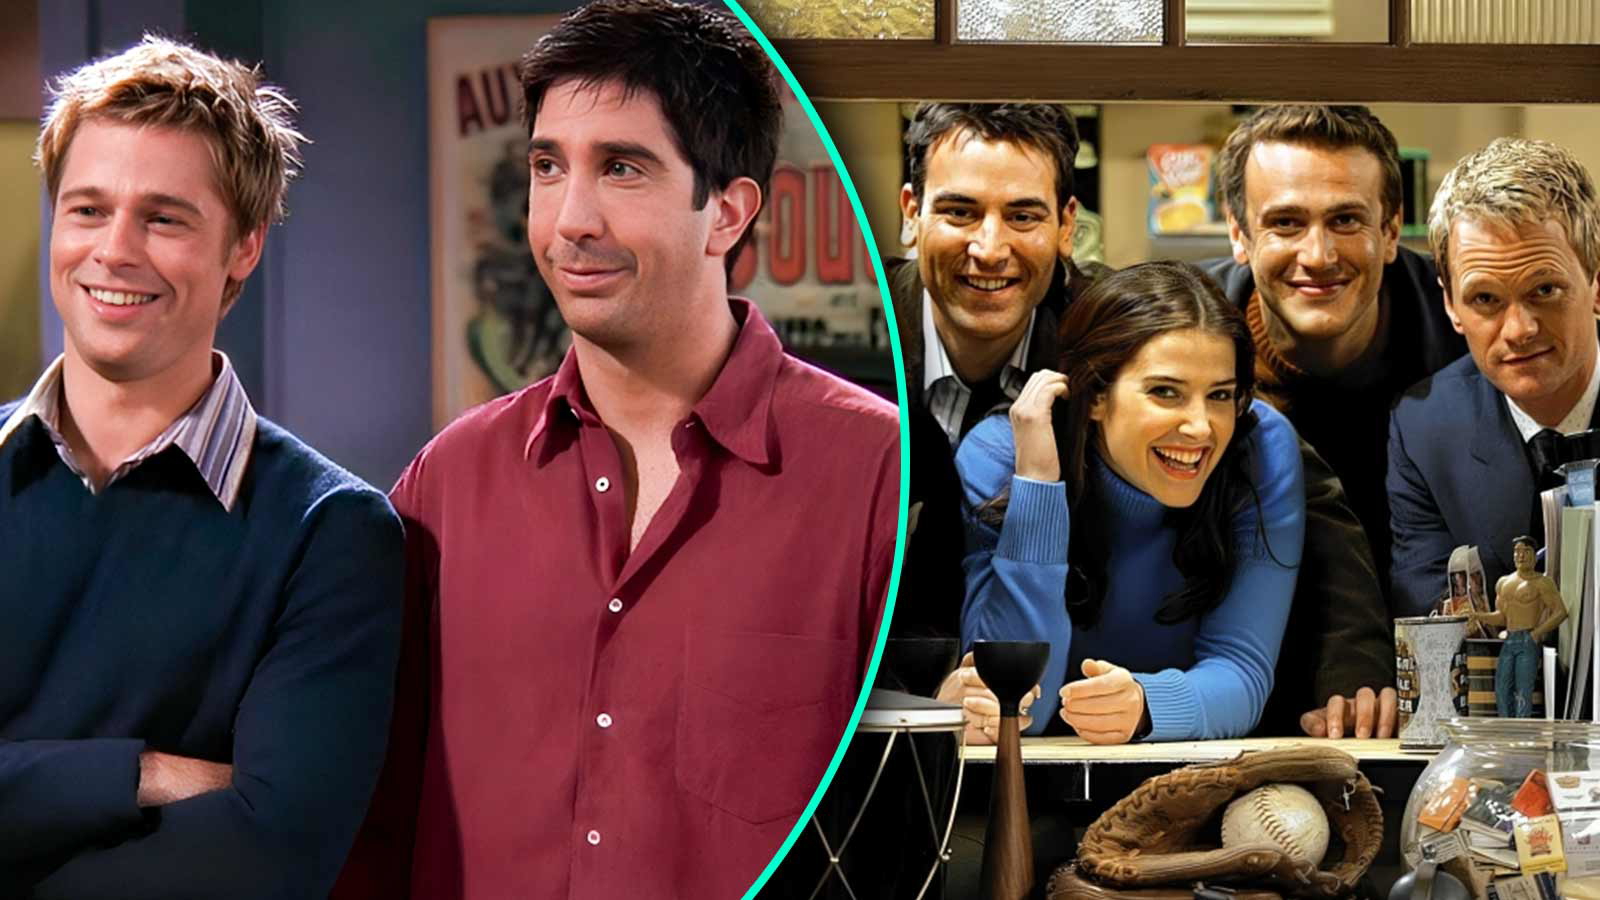 One Bombshell ‘How I Met Your Mother’ Cameo Was So Perfect It Can Give Brad Pitt’s ‘Friends’ Episode a Run for Its Money